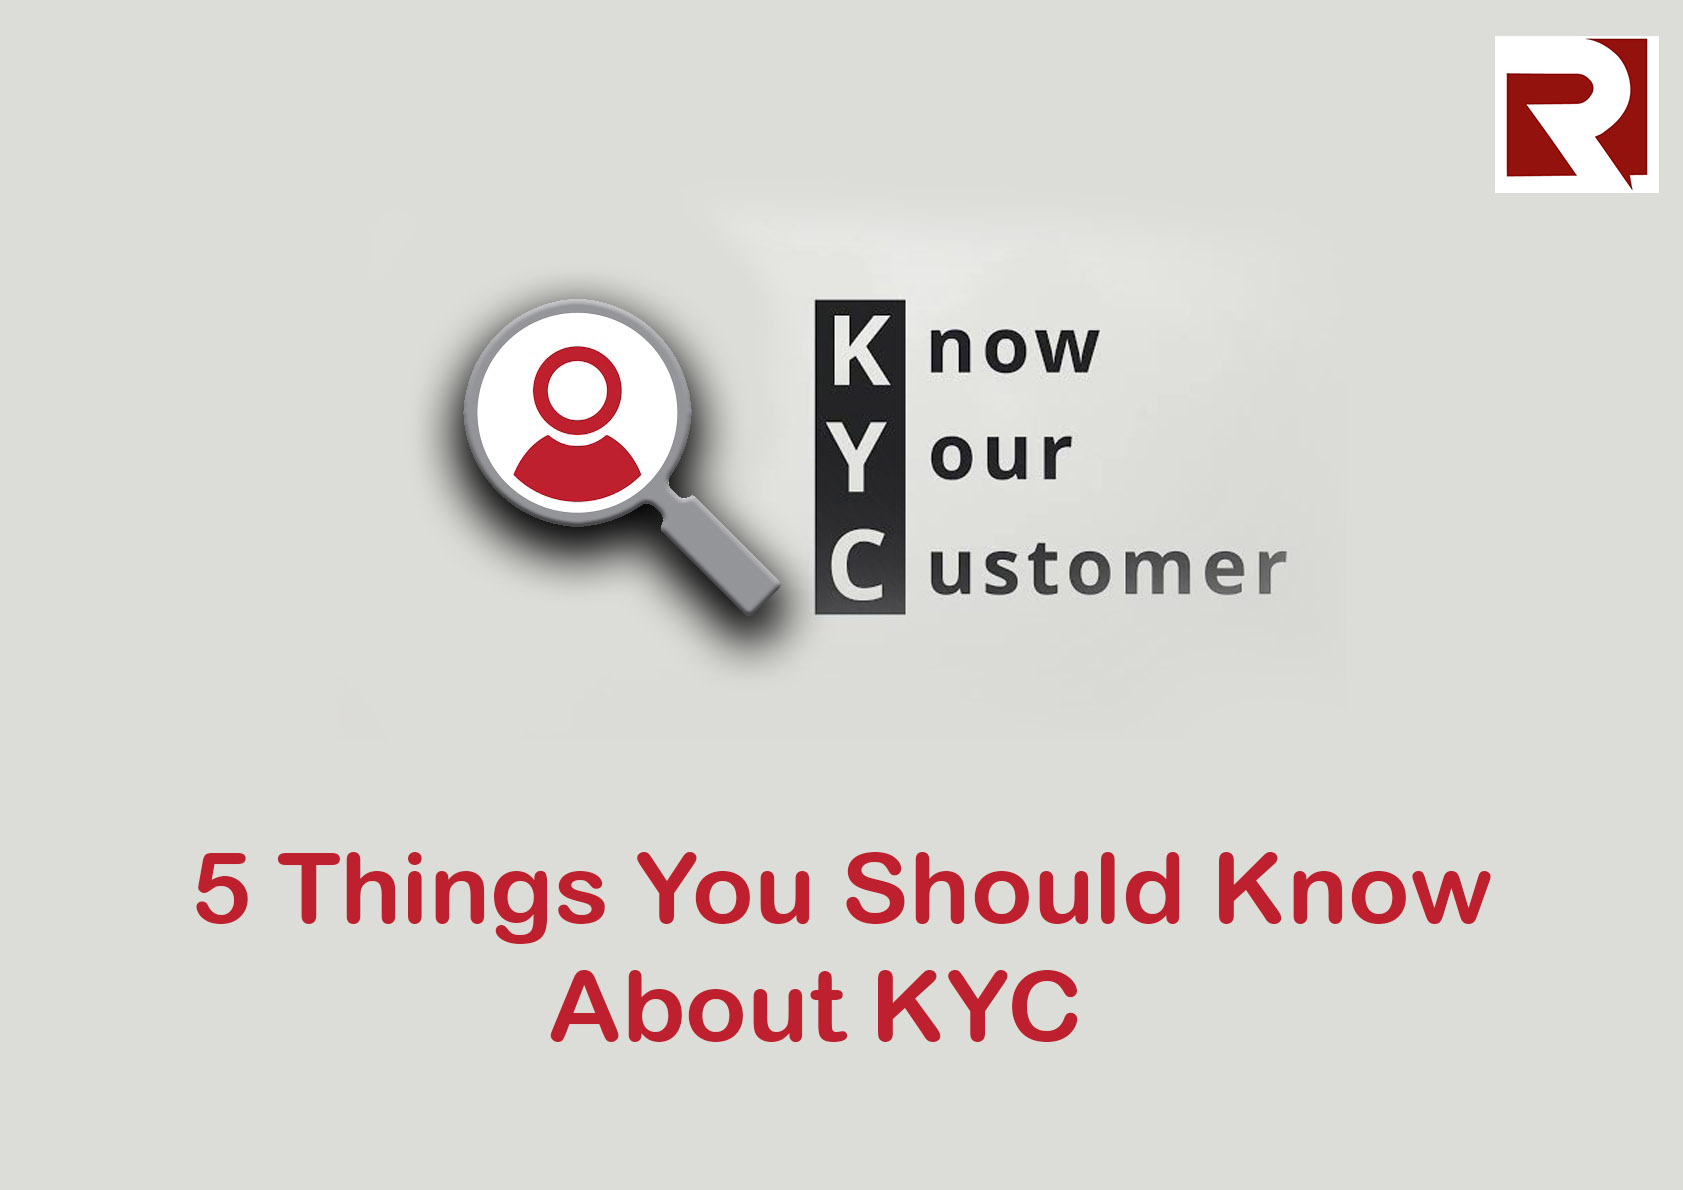 5 Things You Should Know About KYC